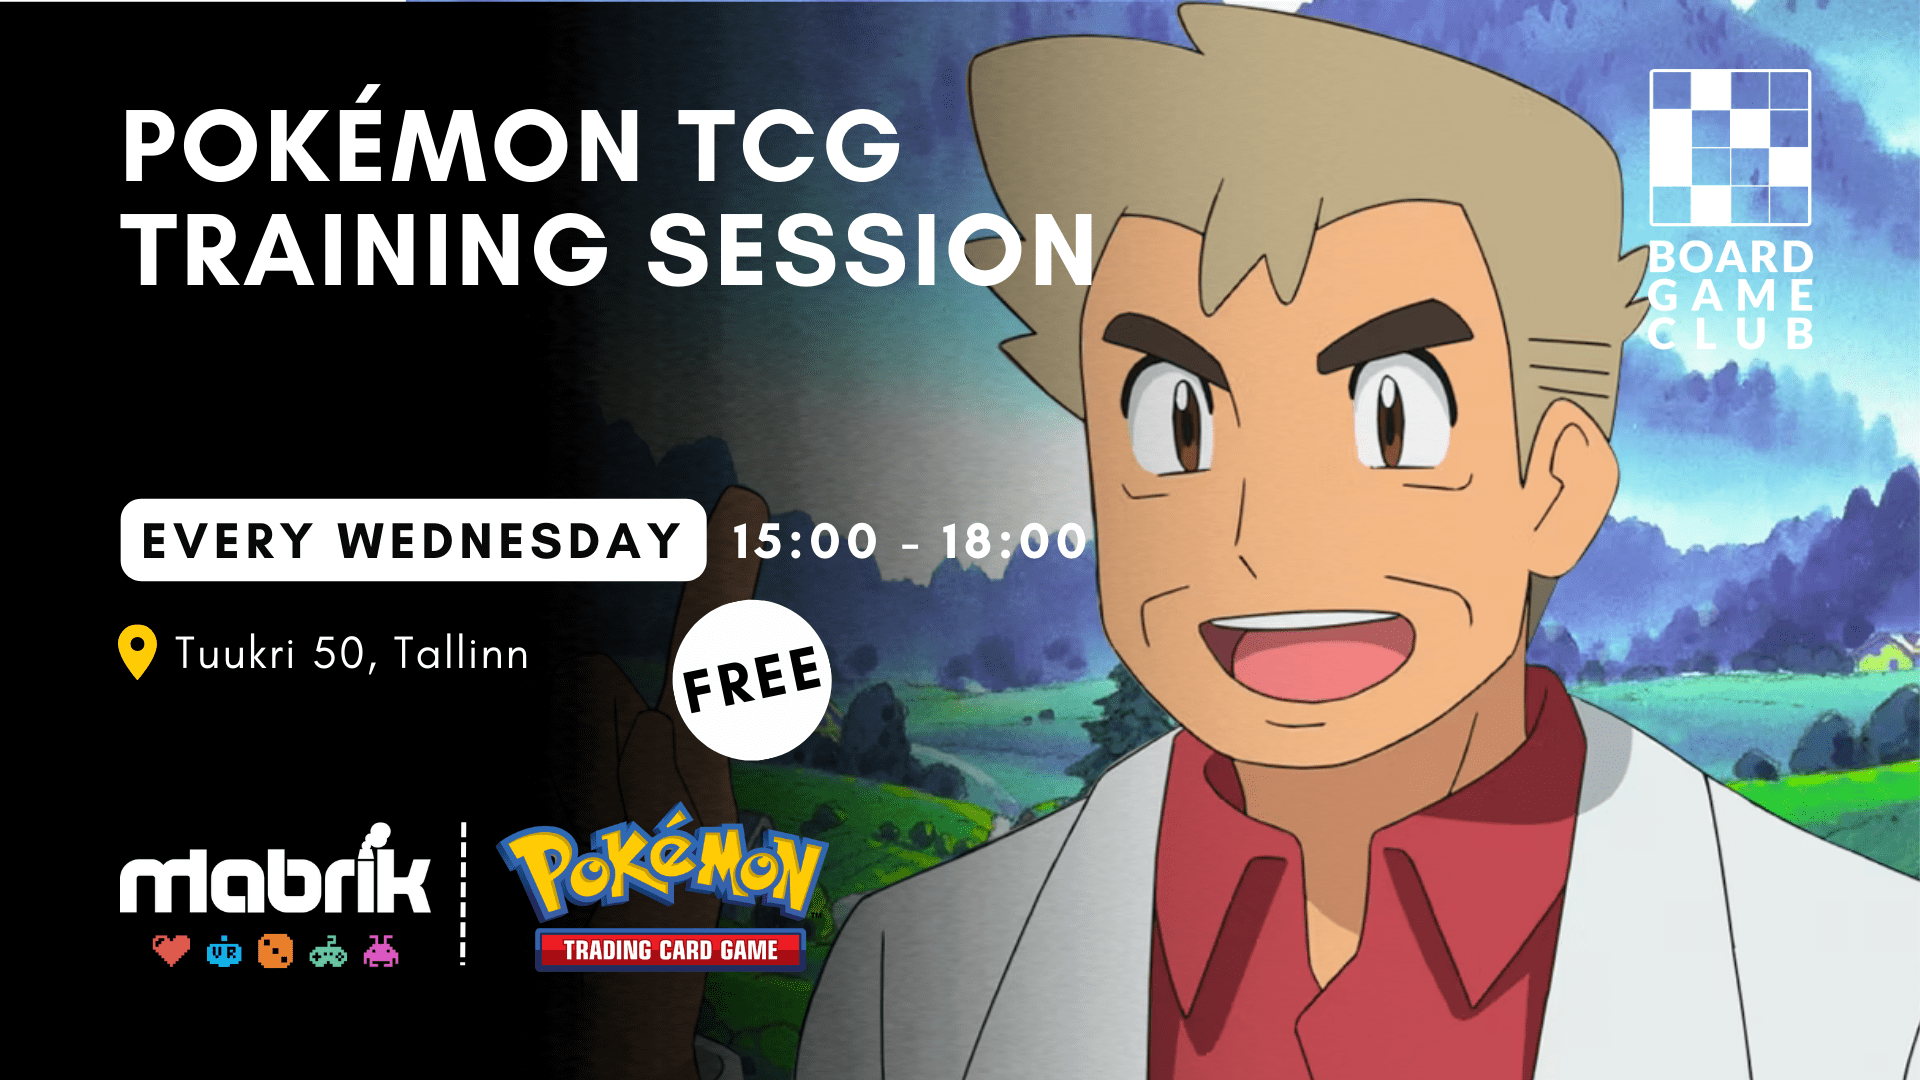 Events - Every Wednesday - Pokemon Training Sessions